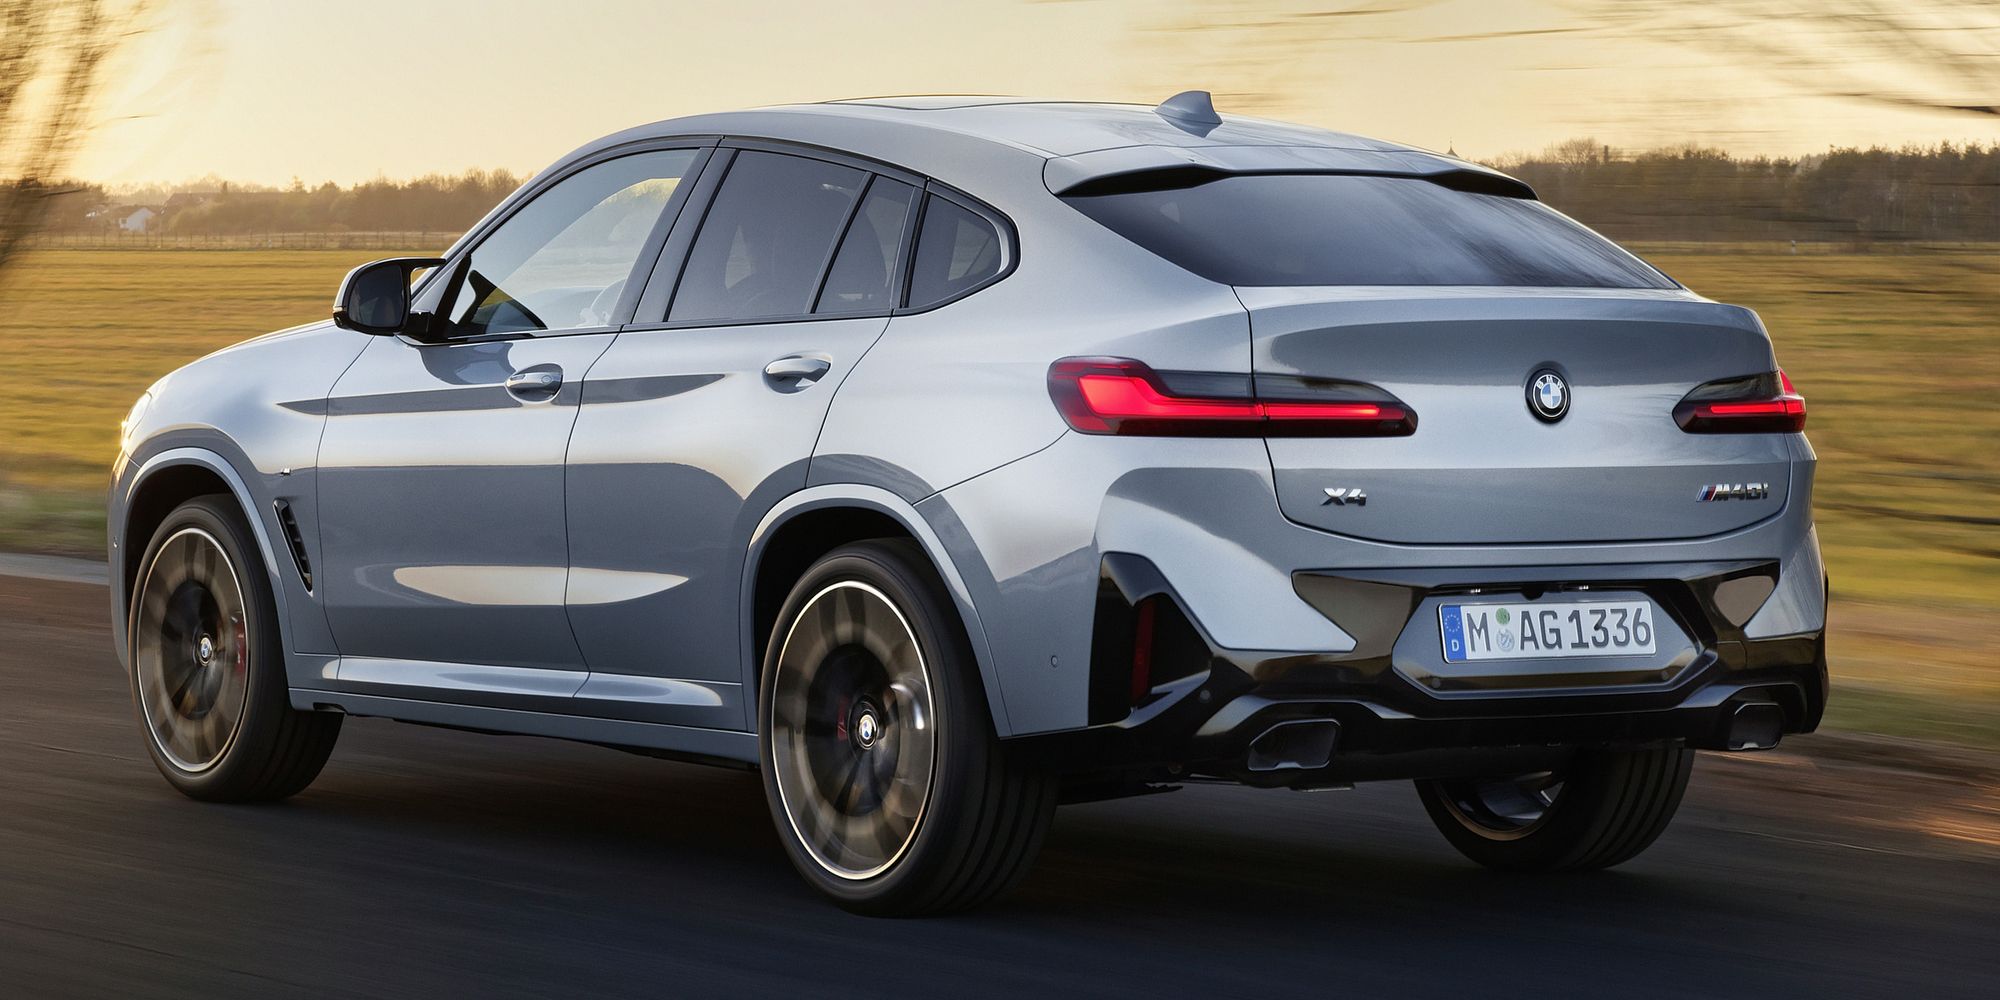 The rear of the BMW X4 on the move